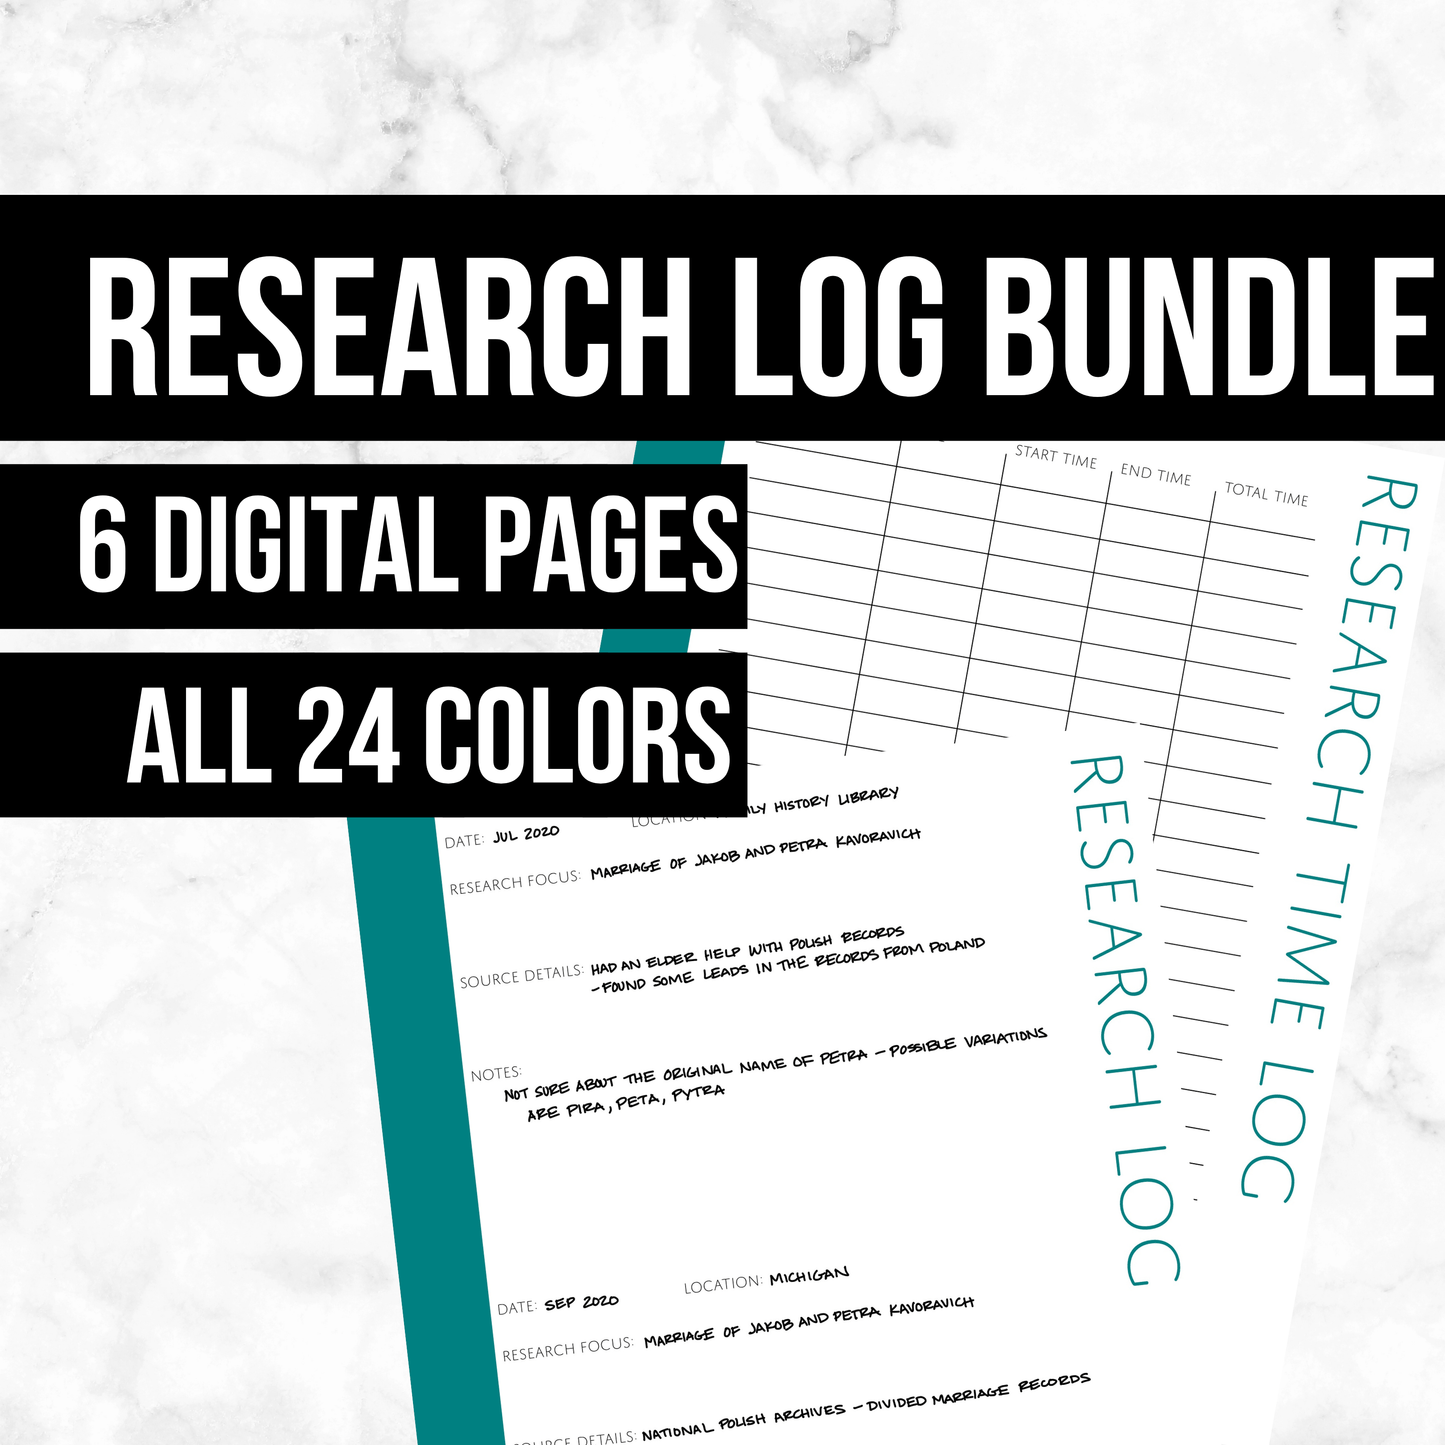 Male-first Index Bundle: 6 Generation Printable Genealogy Pages digital  Download Family Tree Notebooks 